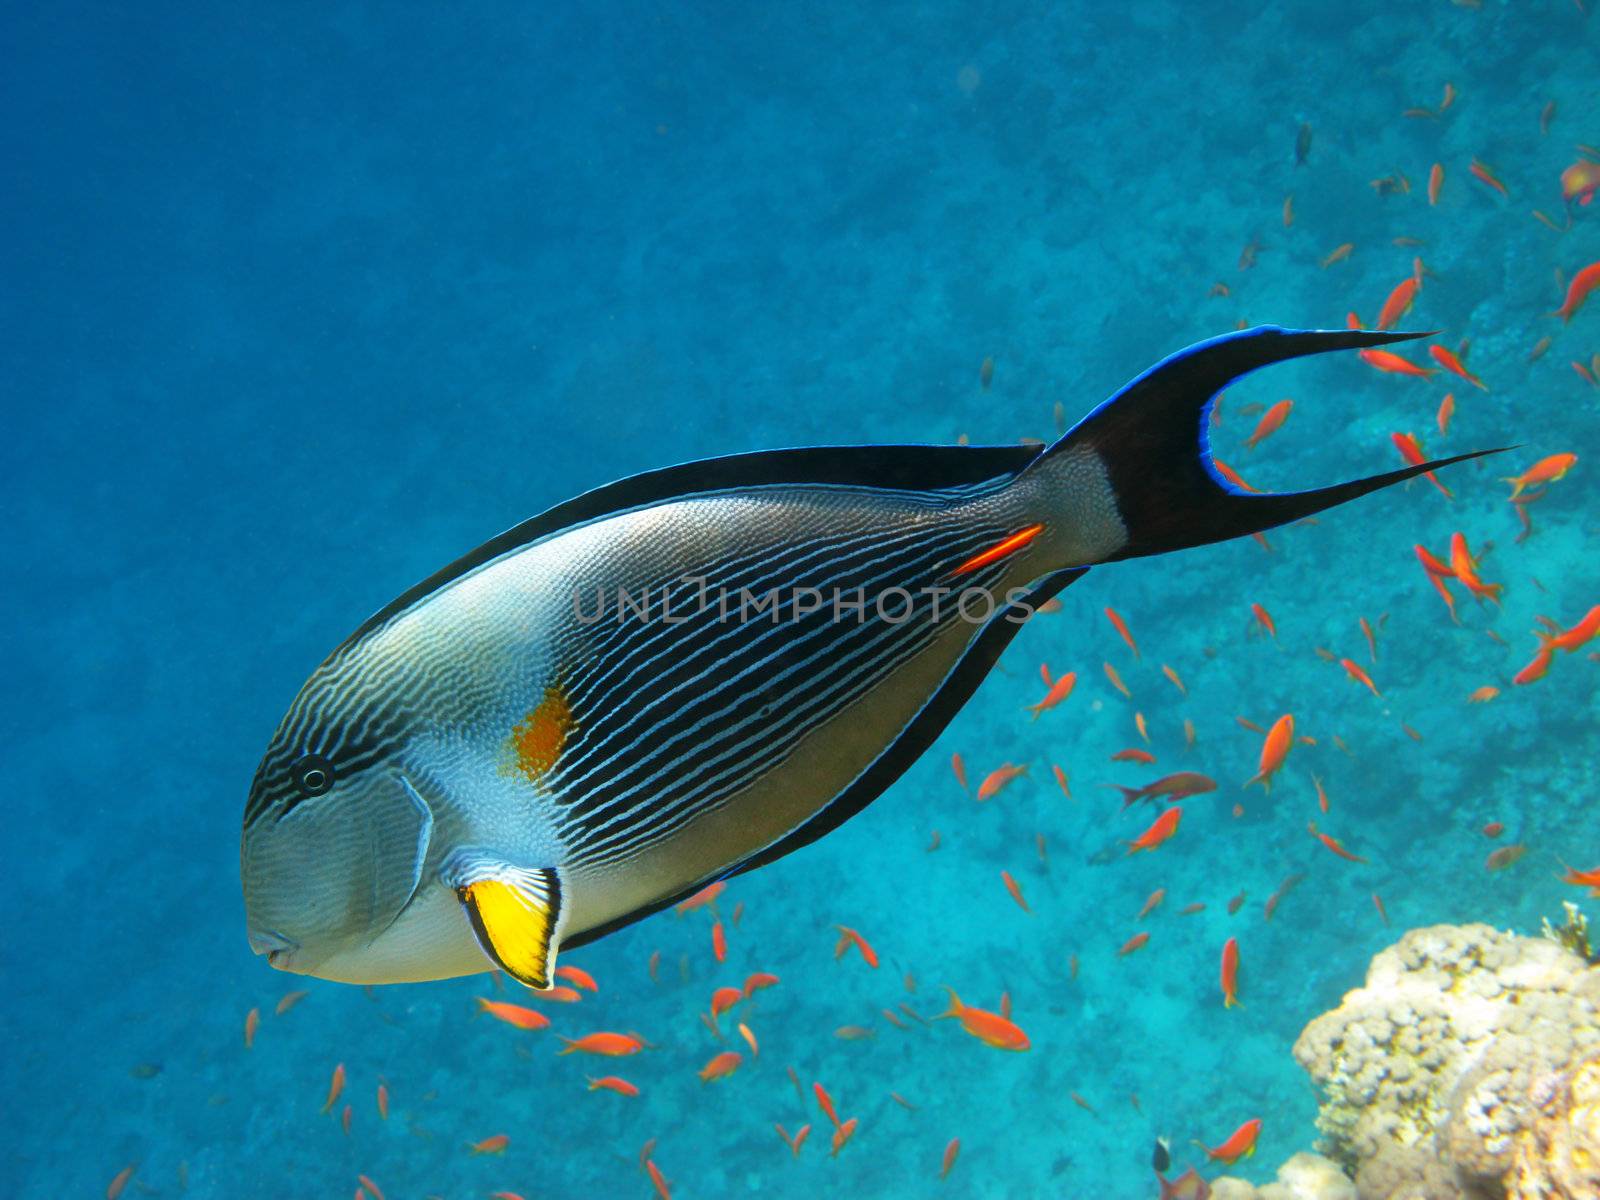 Sohal surgeonfish and coral reef by vintrom